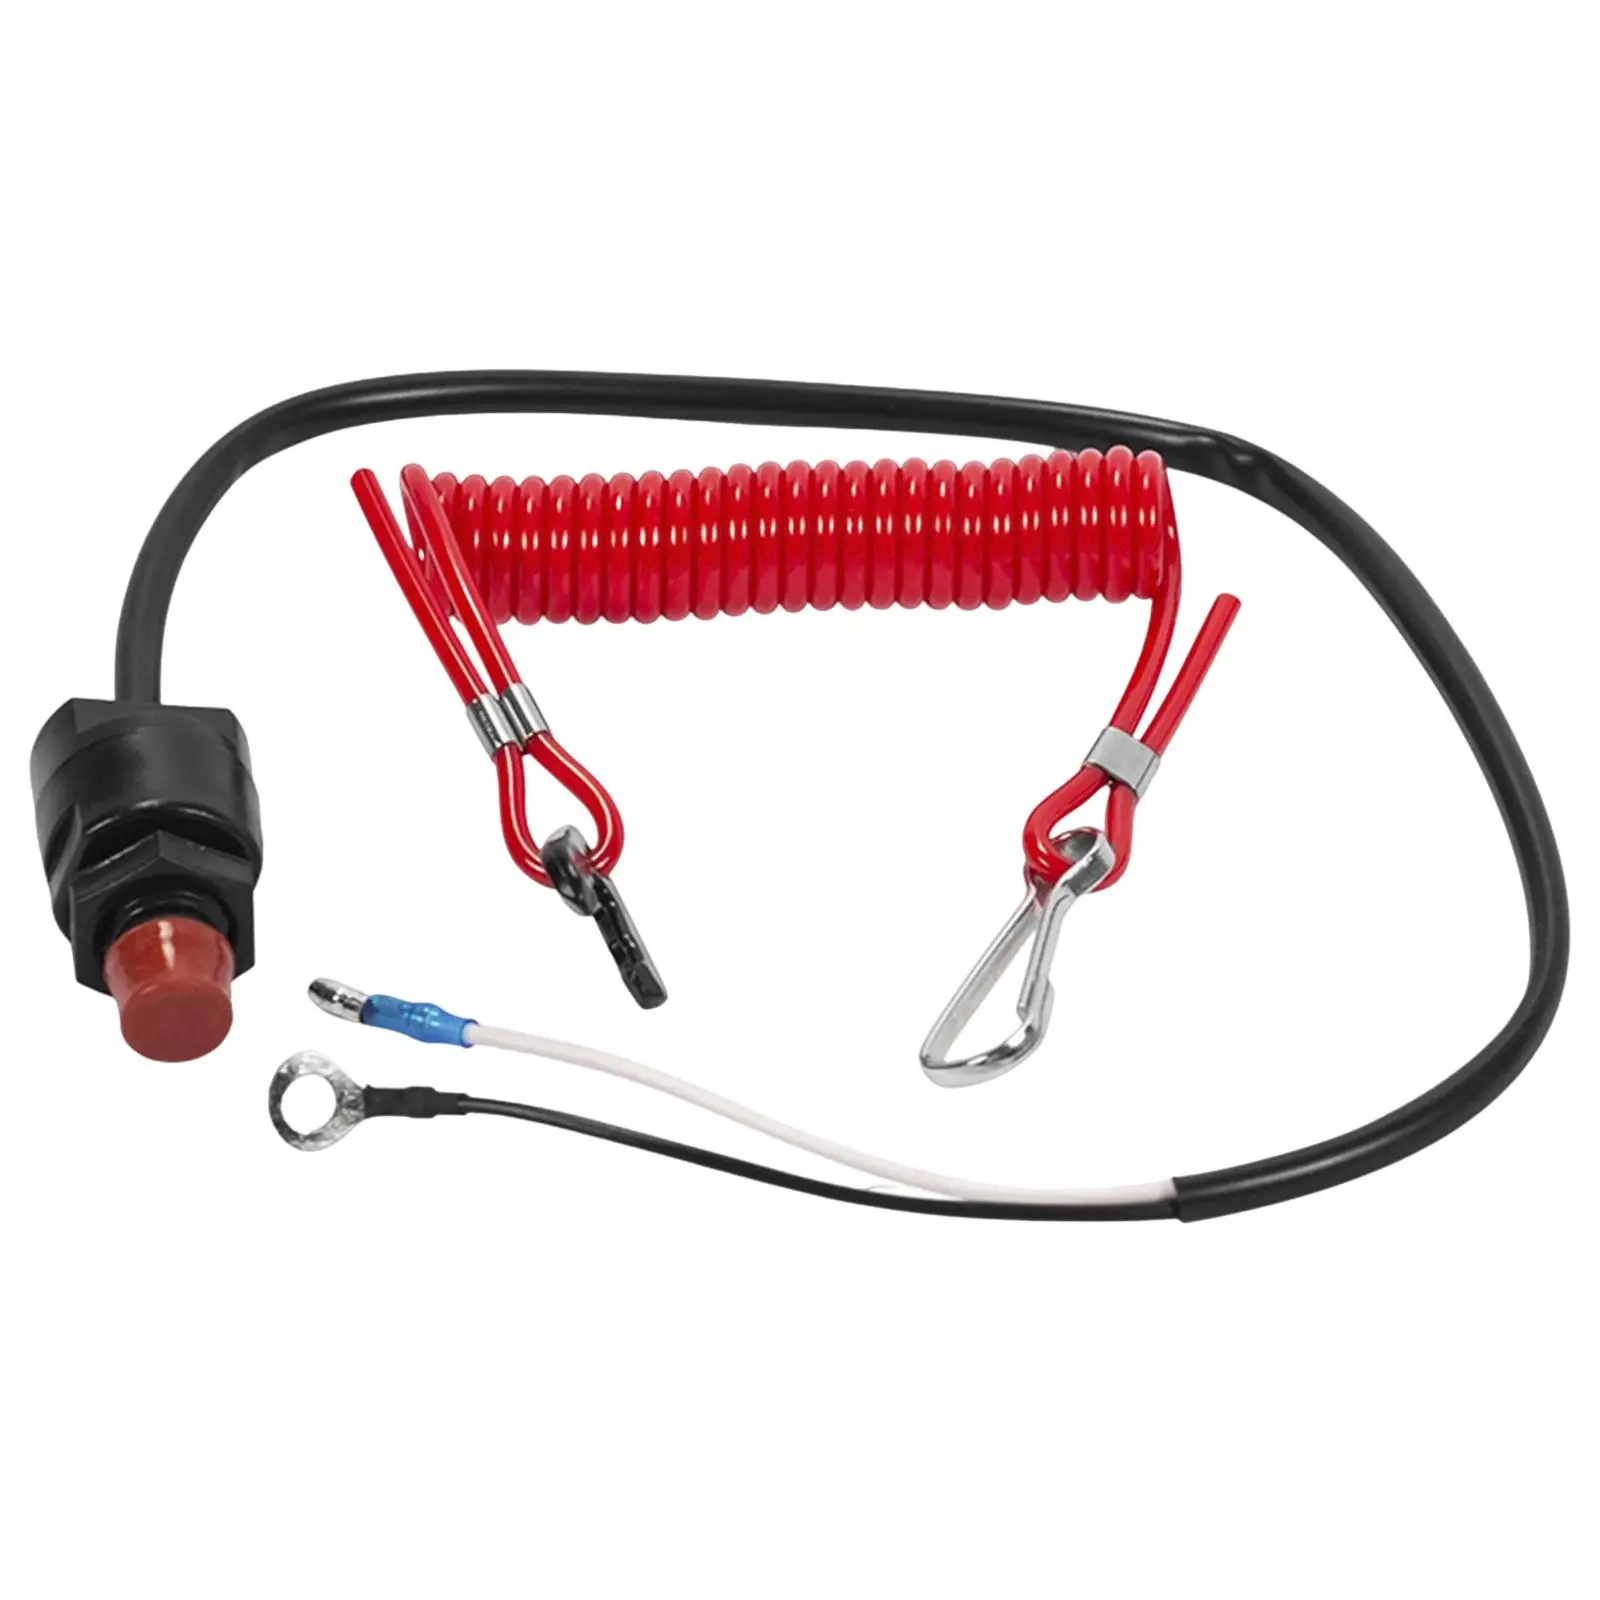 Flameout Switch  Out Key Lanyard Strap Cord Suit Ignition Rope for Motorboat